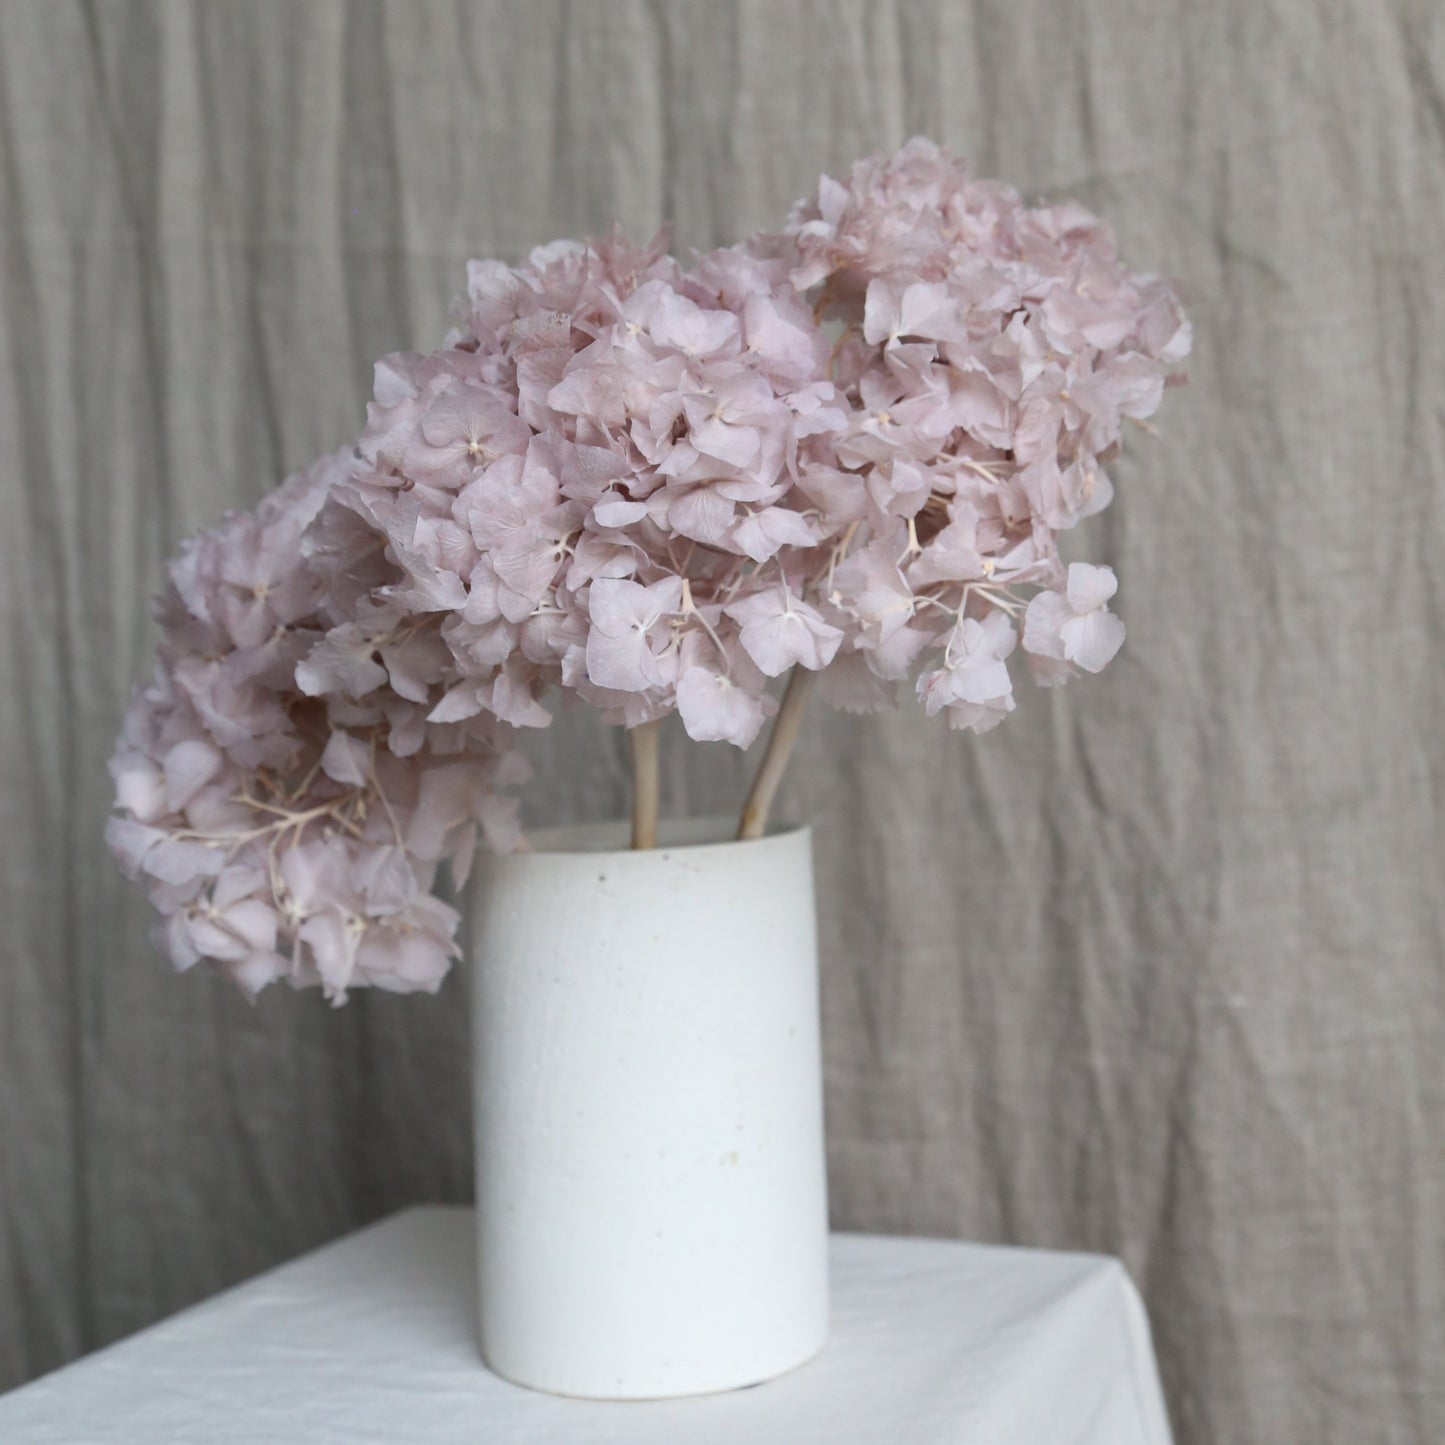 Lilac everlasting hydrangea available at Rook & Rose.